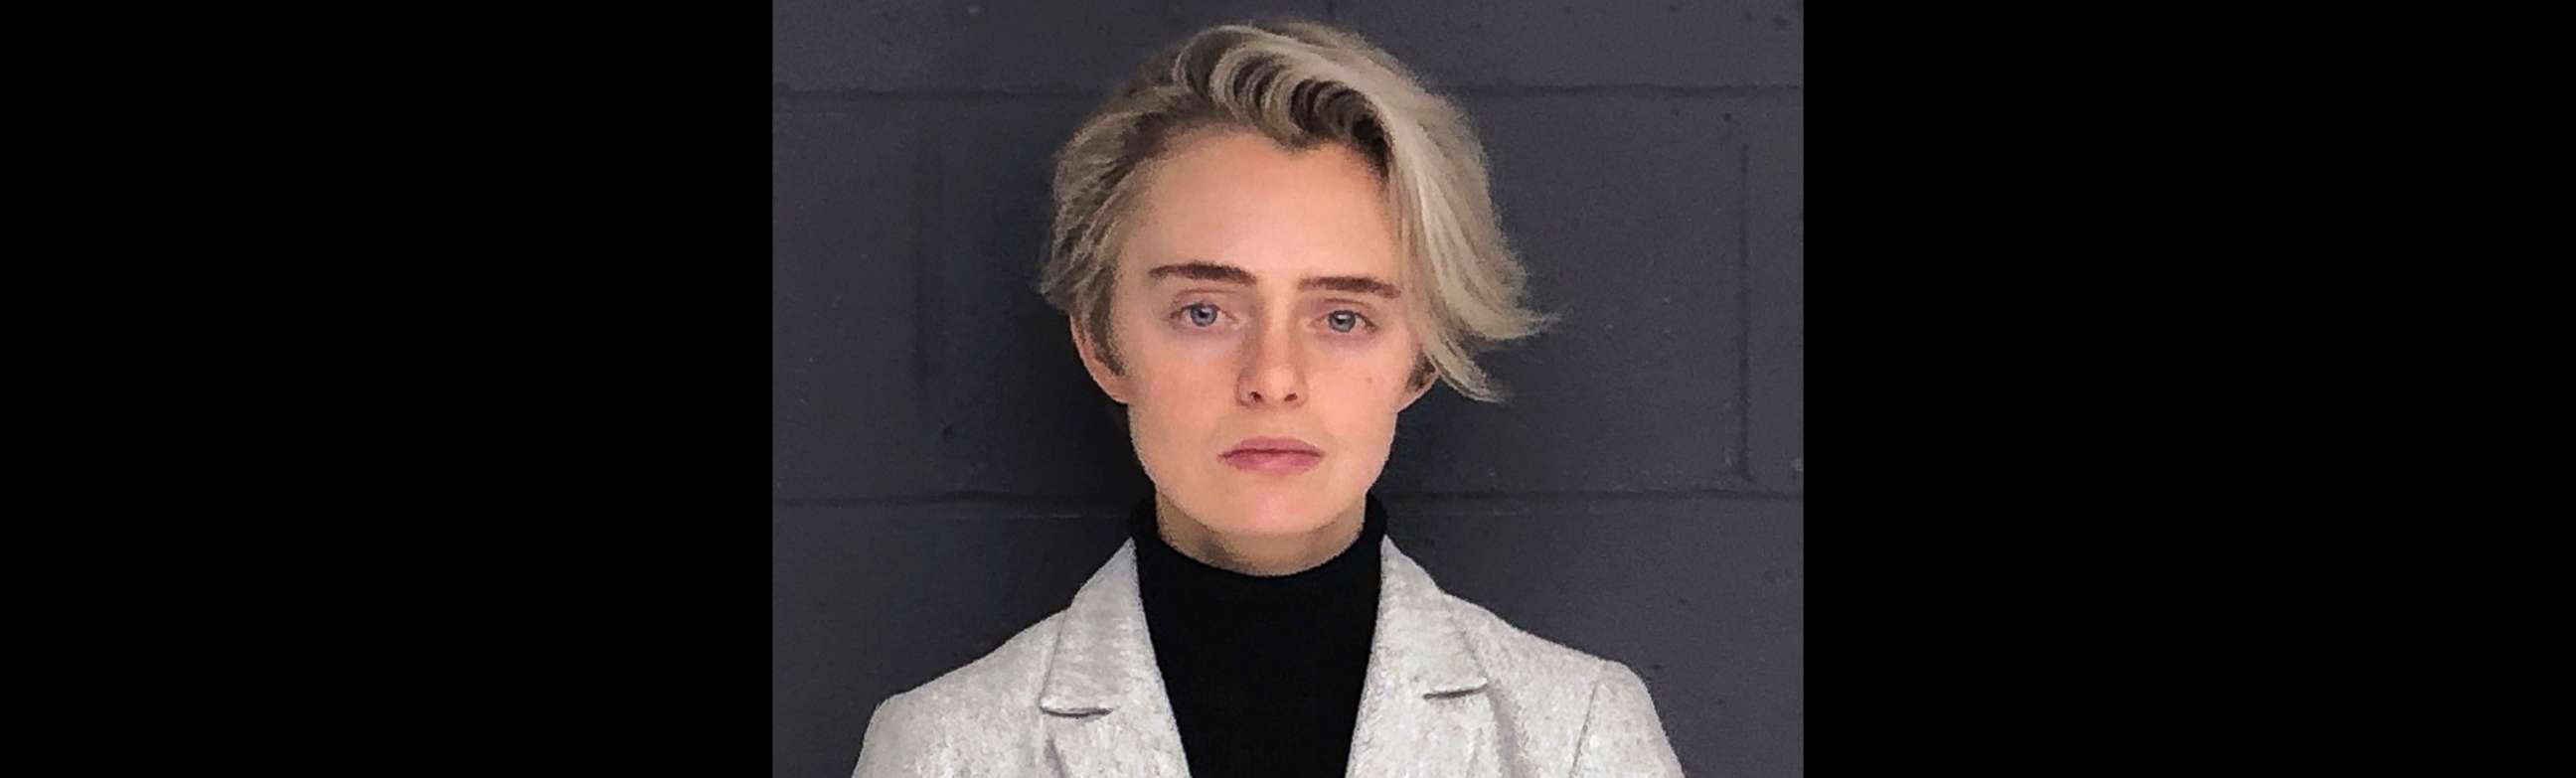 PHOTO: This Feb. 11, 2019, booking photo released by the Bristol County Sheriff's Office shows Michelle Carter.